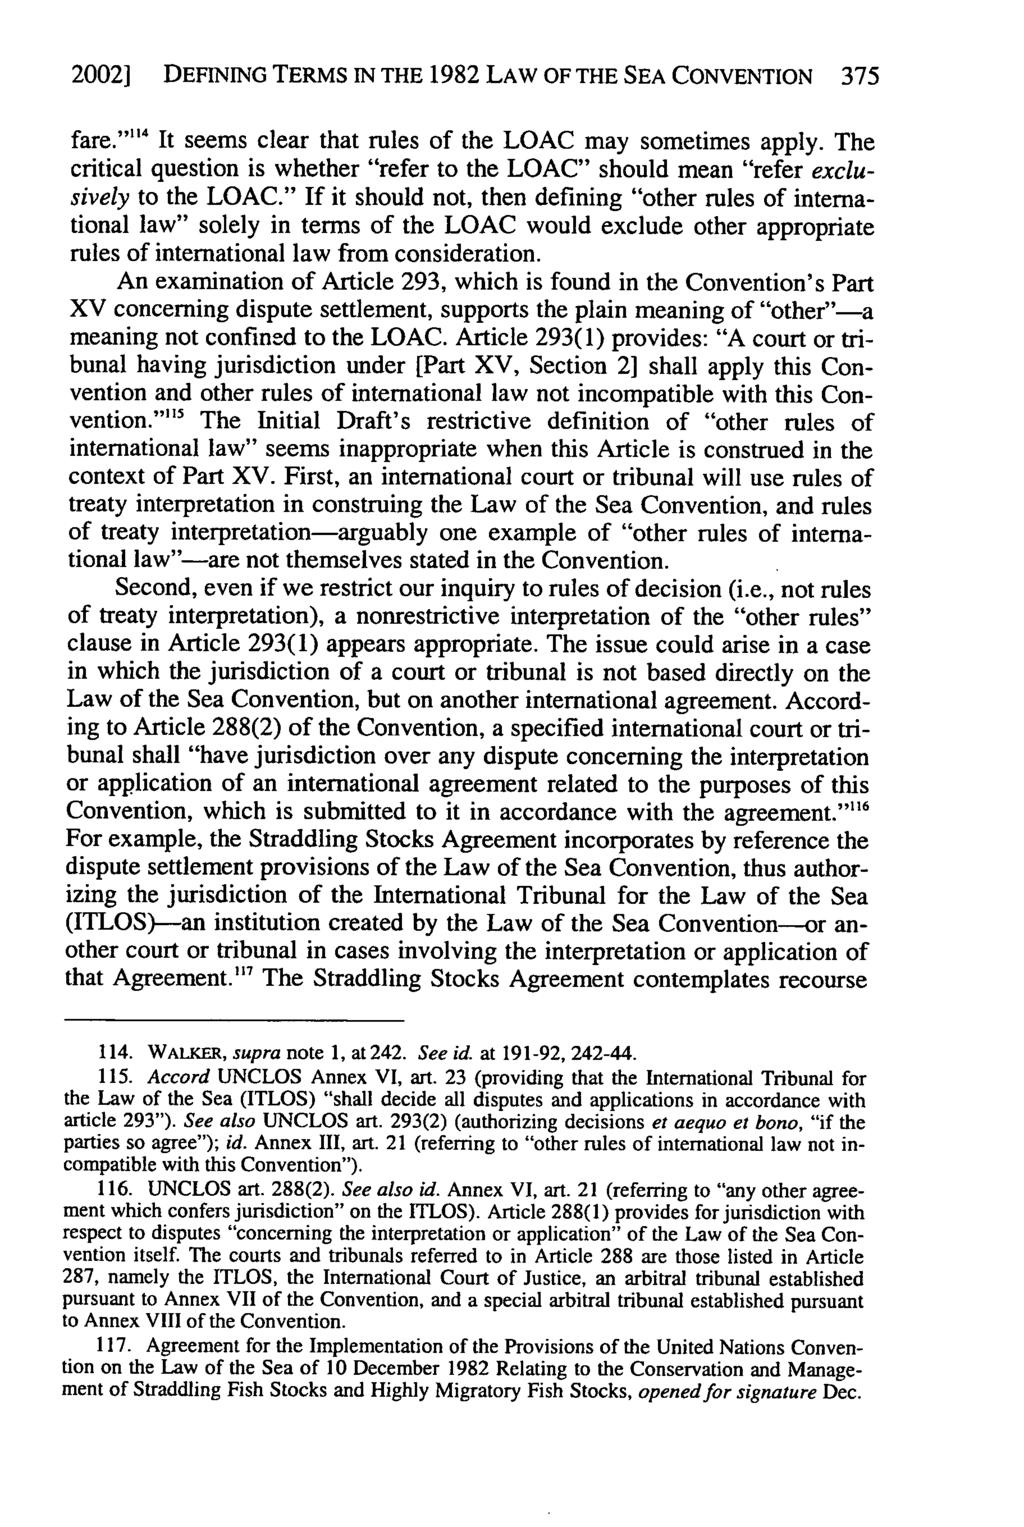 Walker and Noyes: Definitions for the 1982 Law of the Sea Convention 2002] DEFINING TERMS IN THE 1982 LAW OF THE SEA CONVENTION 375 fare.""' It seems clear that rules of the LOAC may sometimes apply.